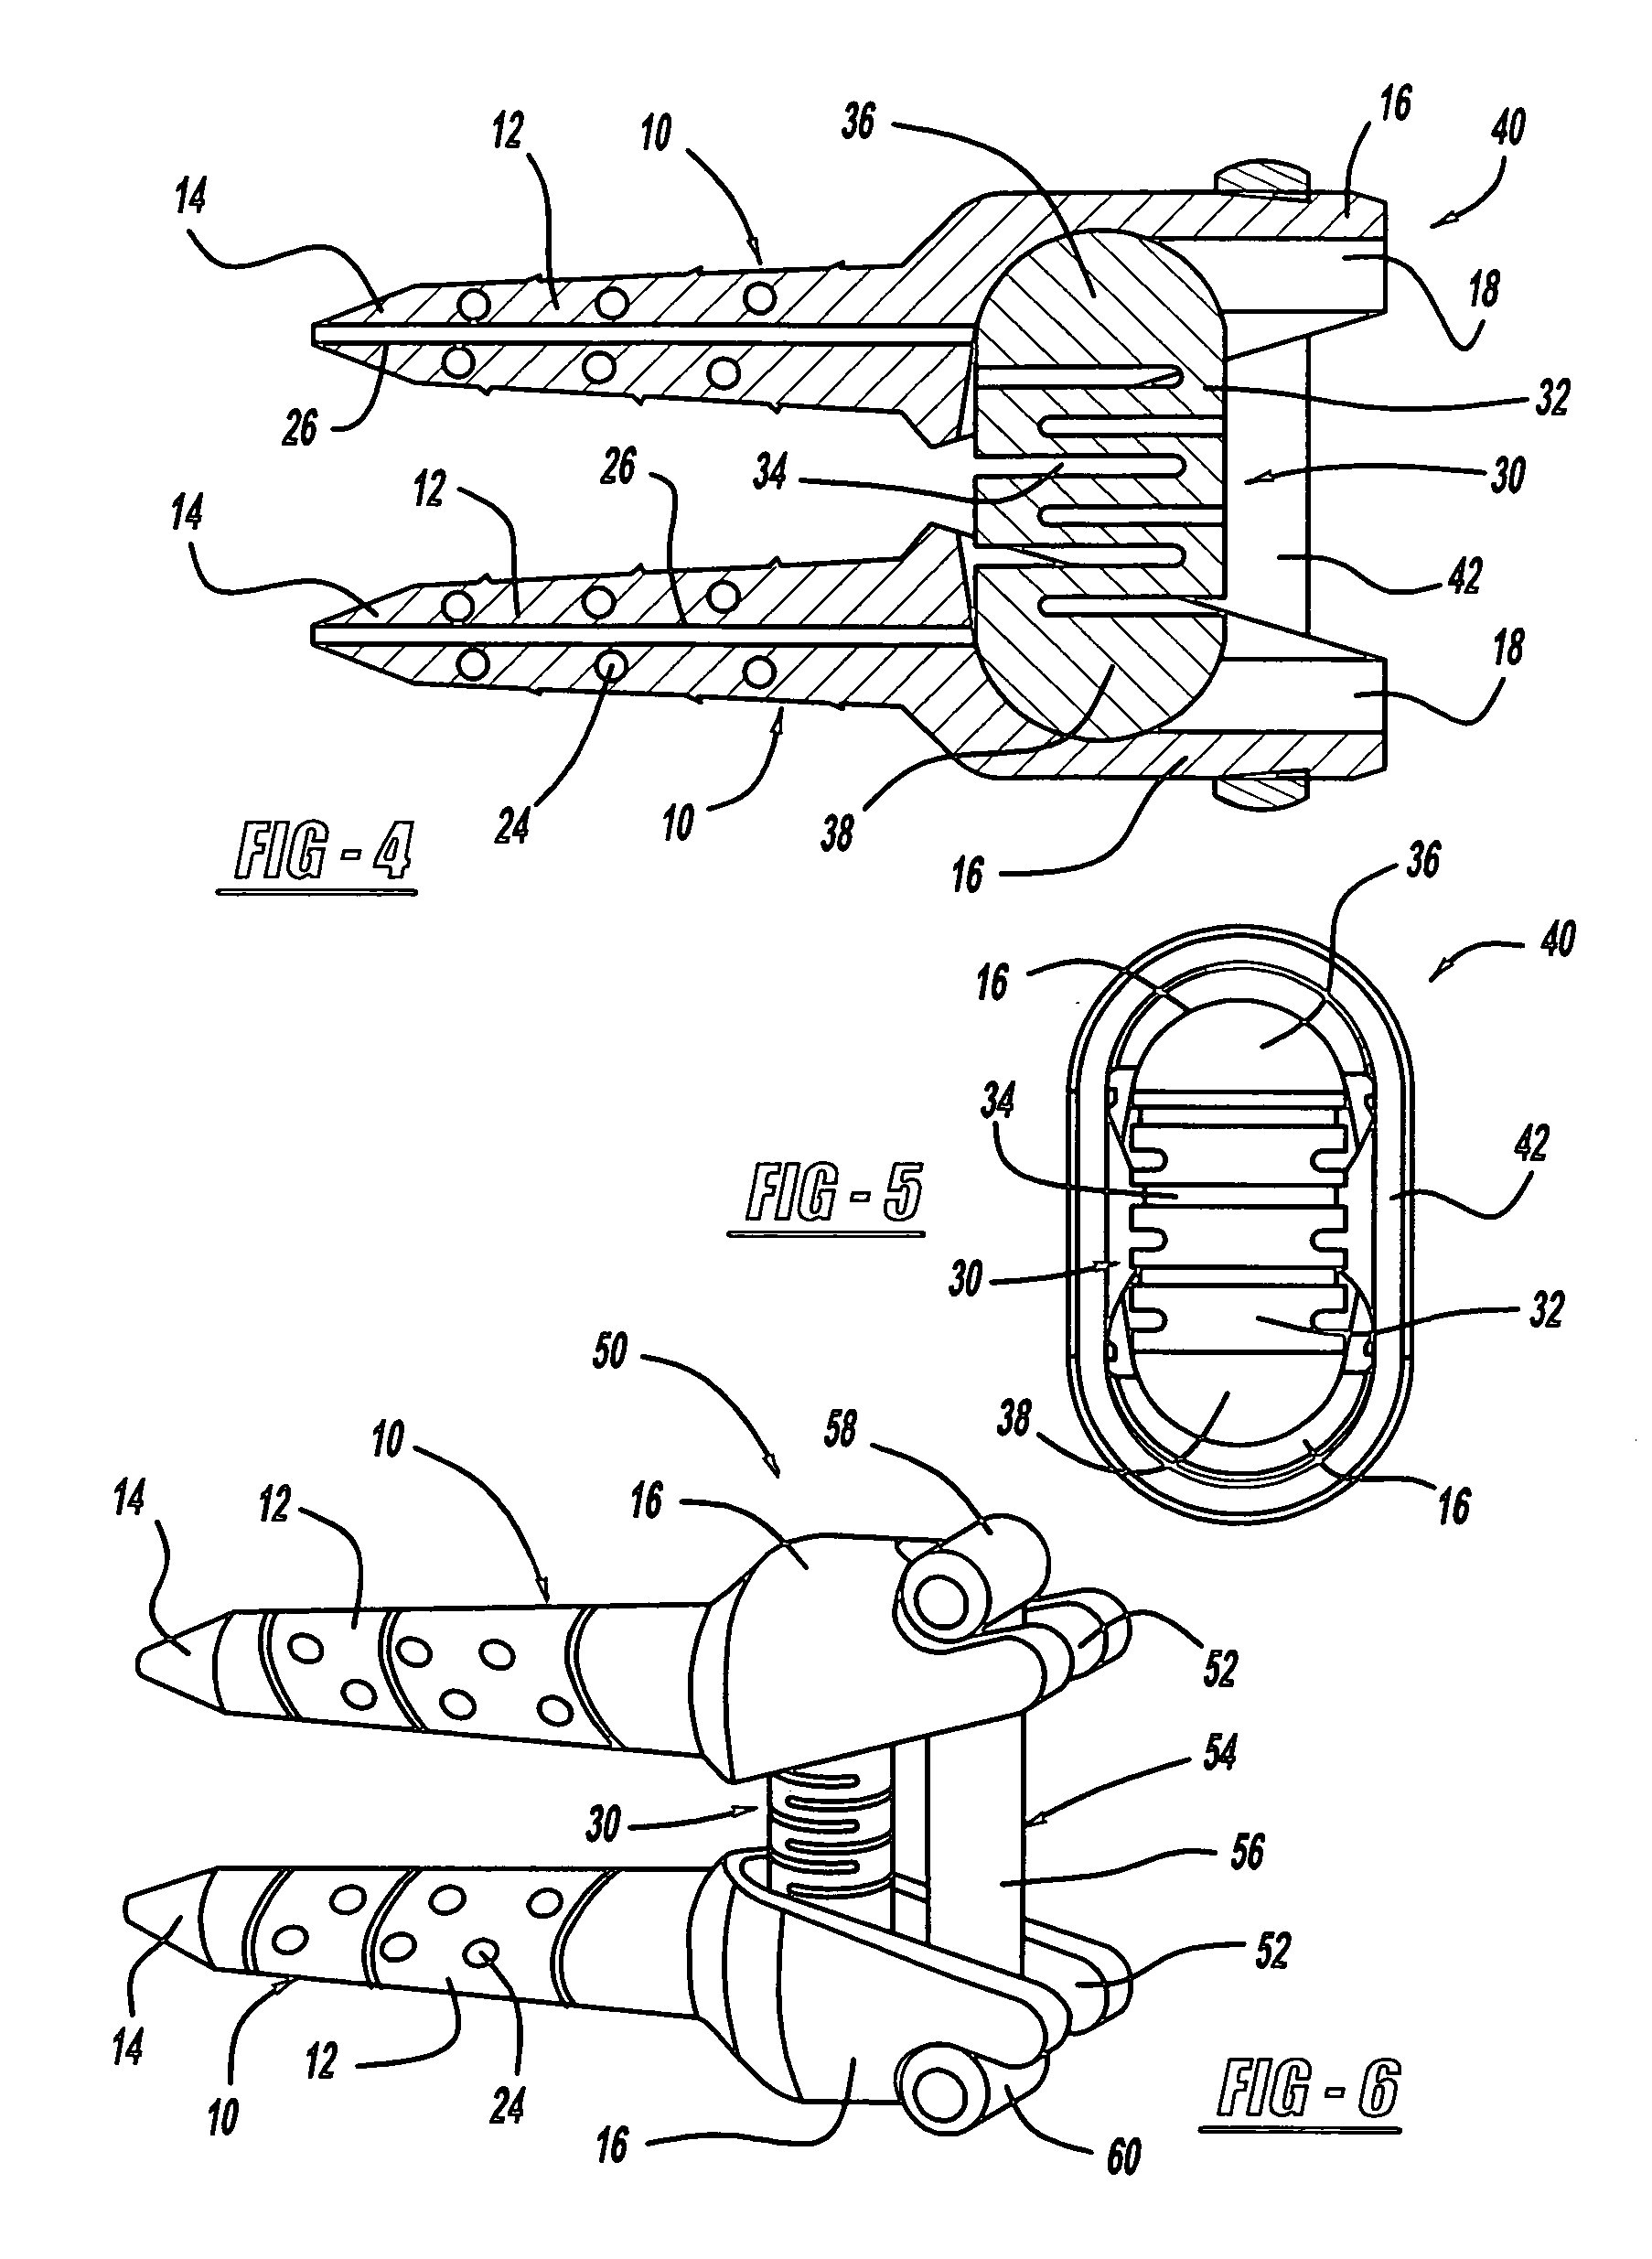 Vertebral disc annular fibrosis tensioning and lengthening device